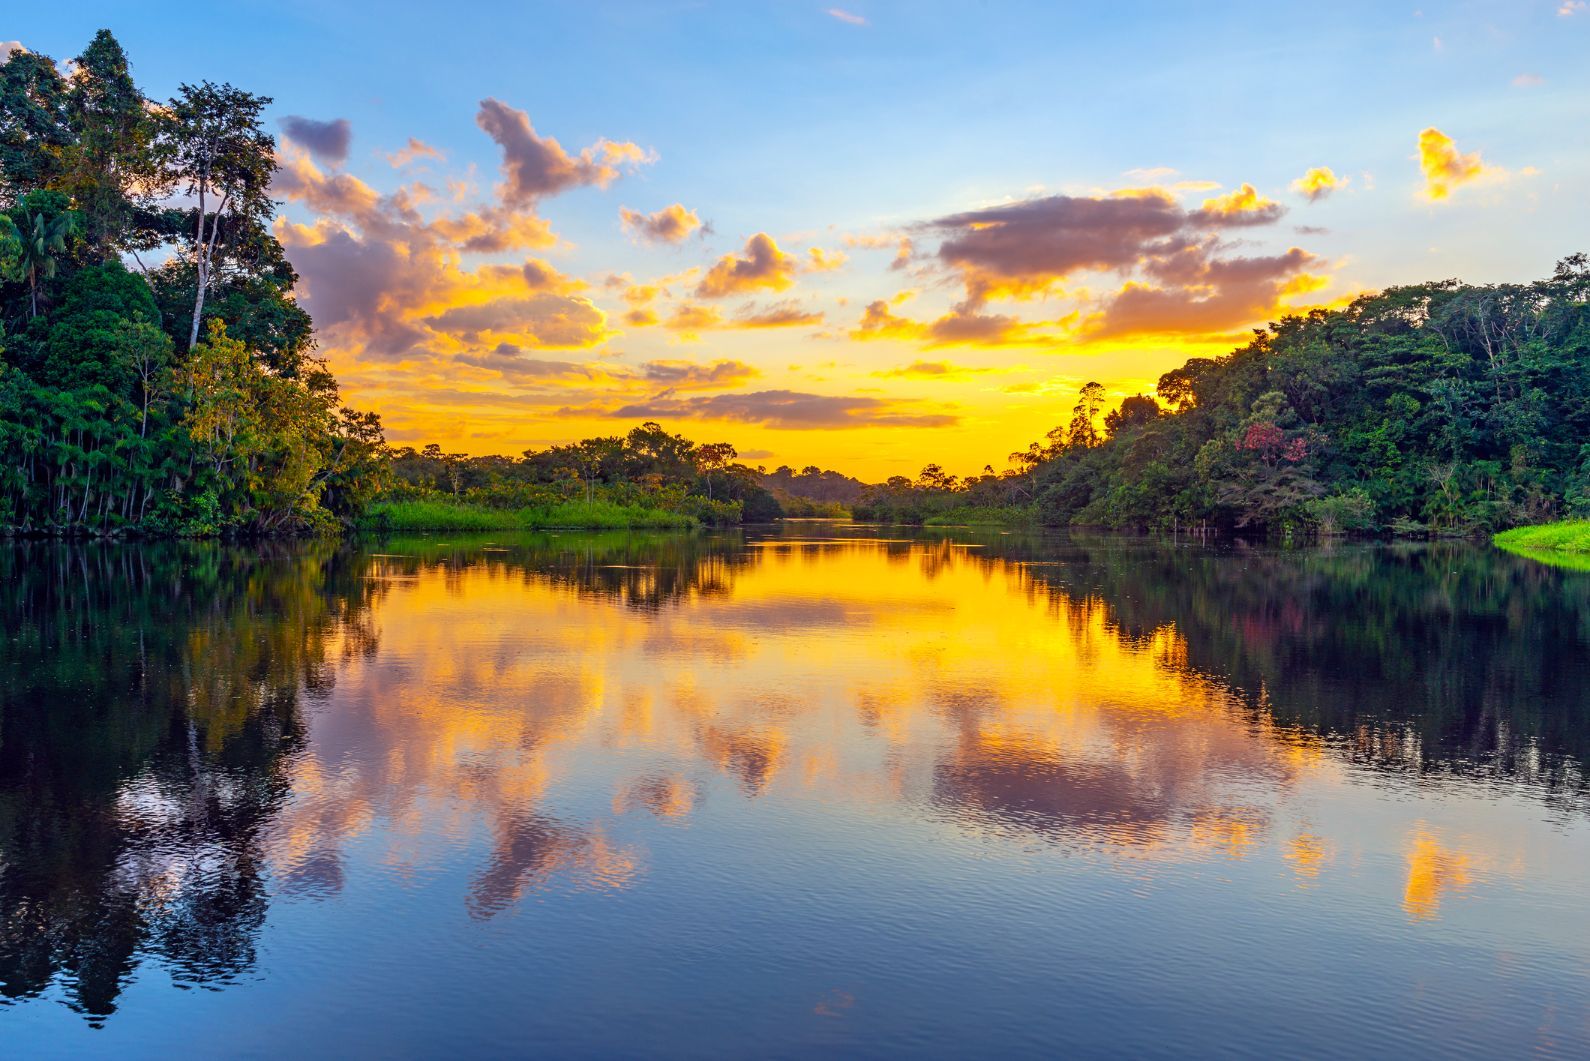 A view of a lake at sunset in the Yasuni National Park, the Ecuadorian Amazon.